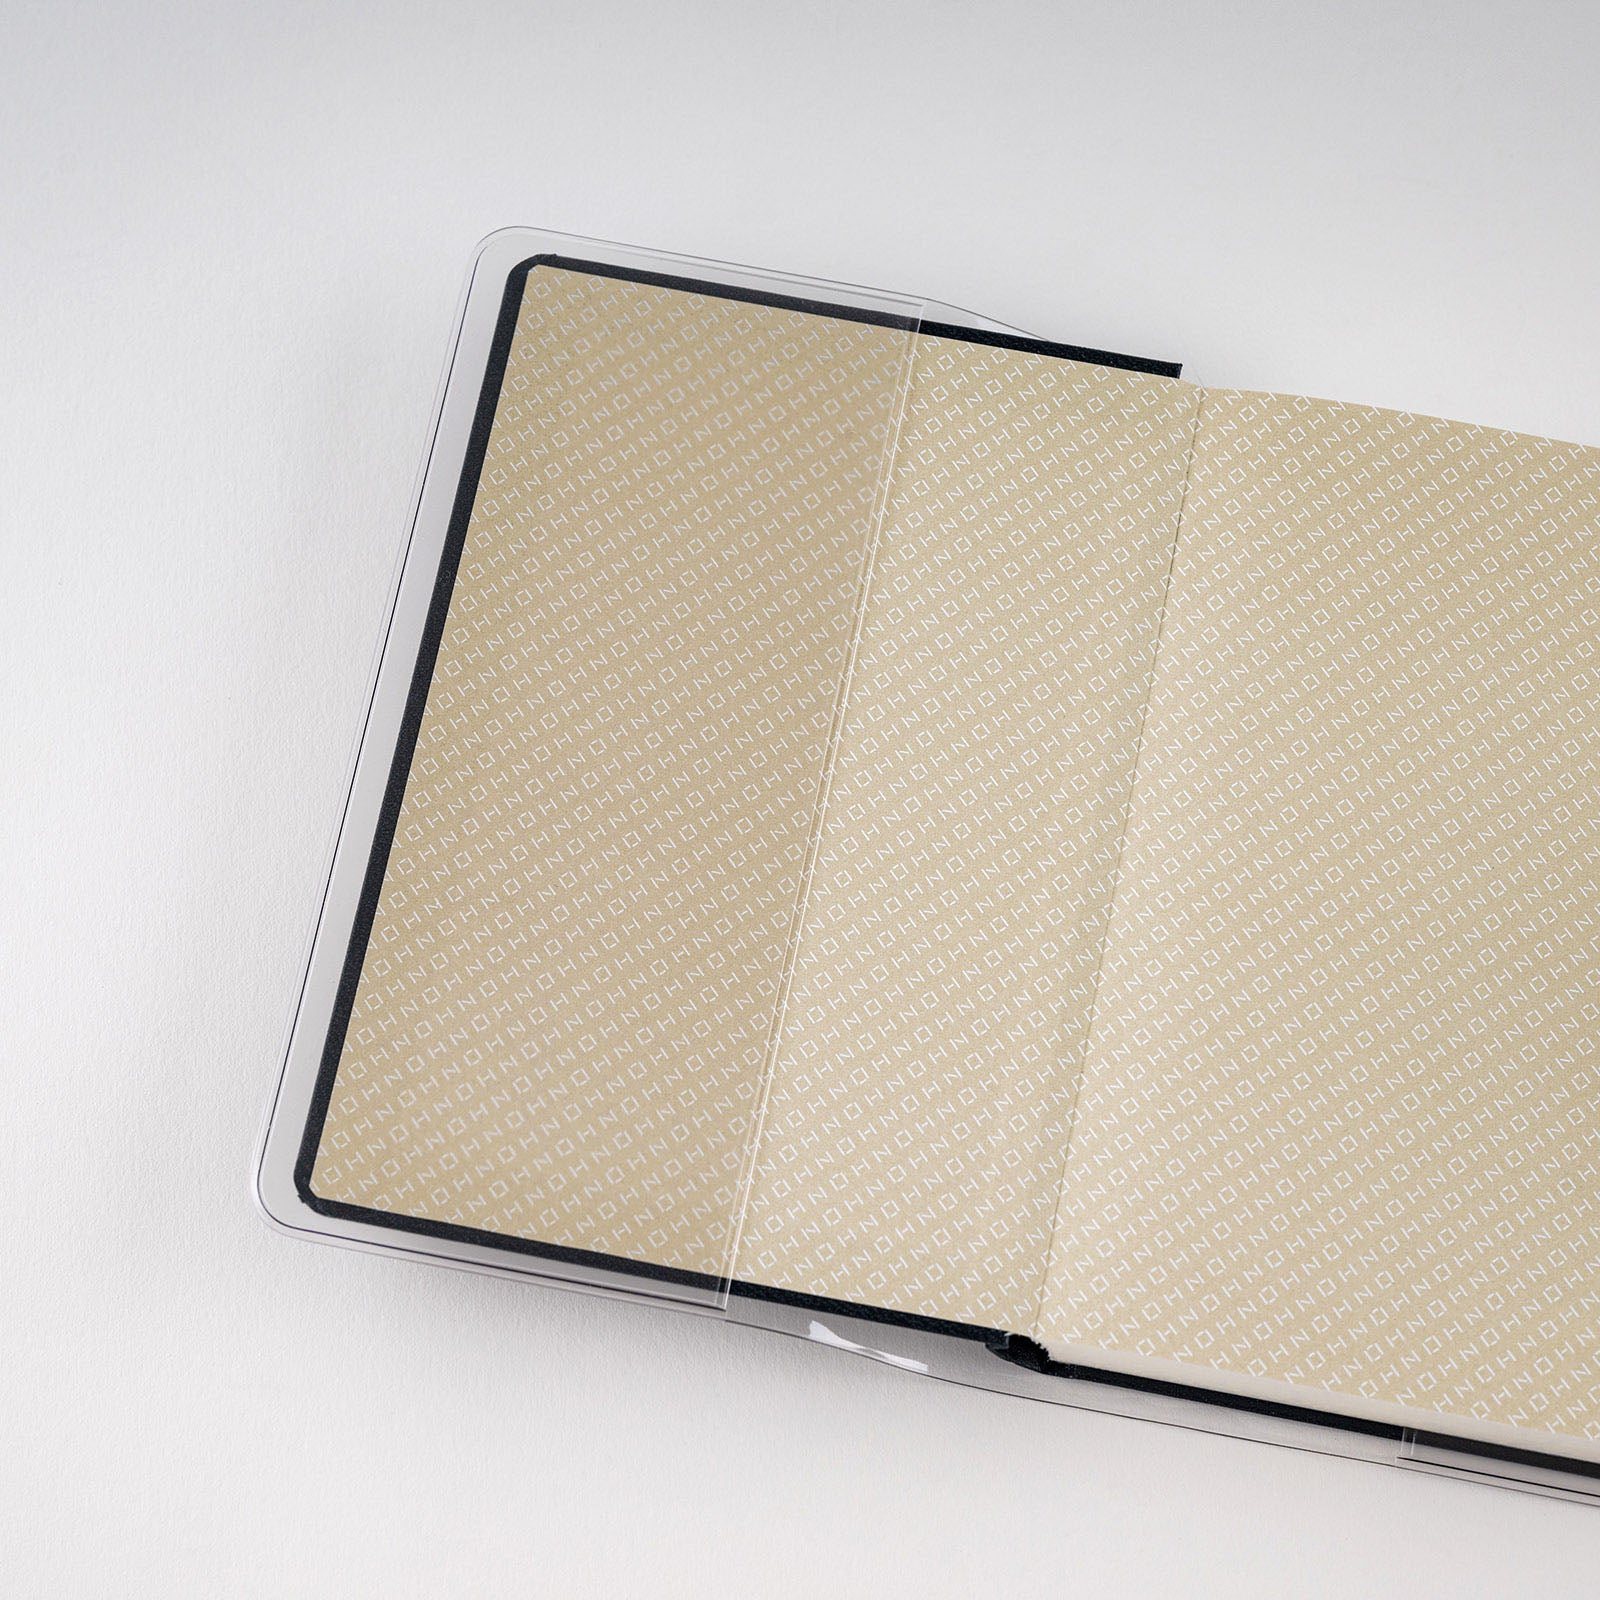 Hobonichi Clear Cover for A6 Size HON